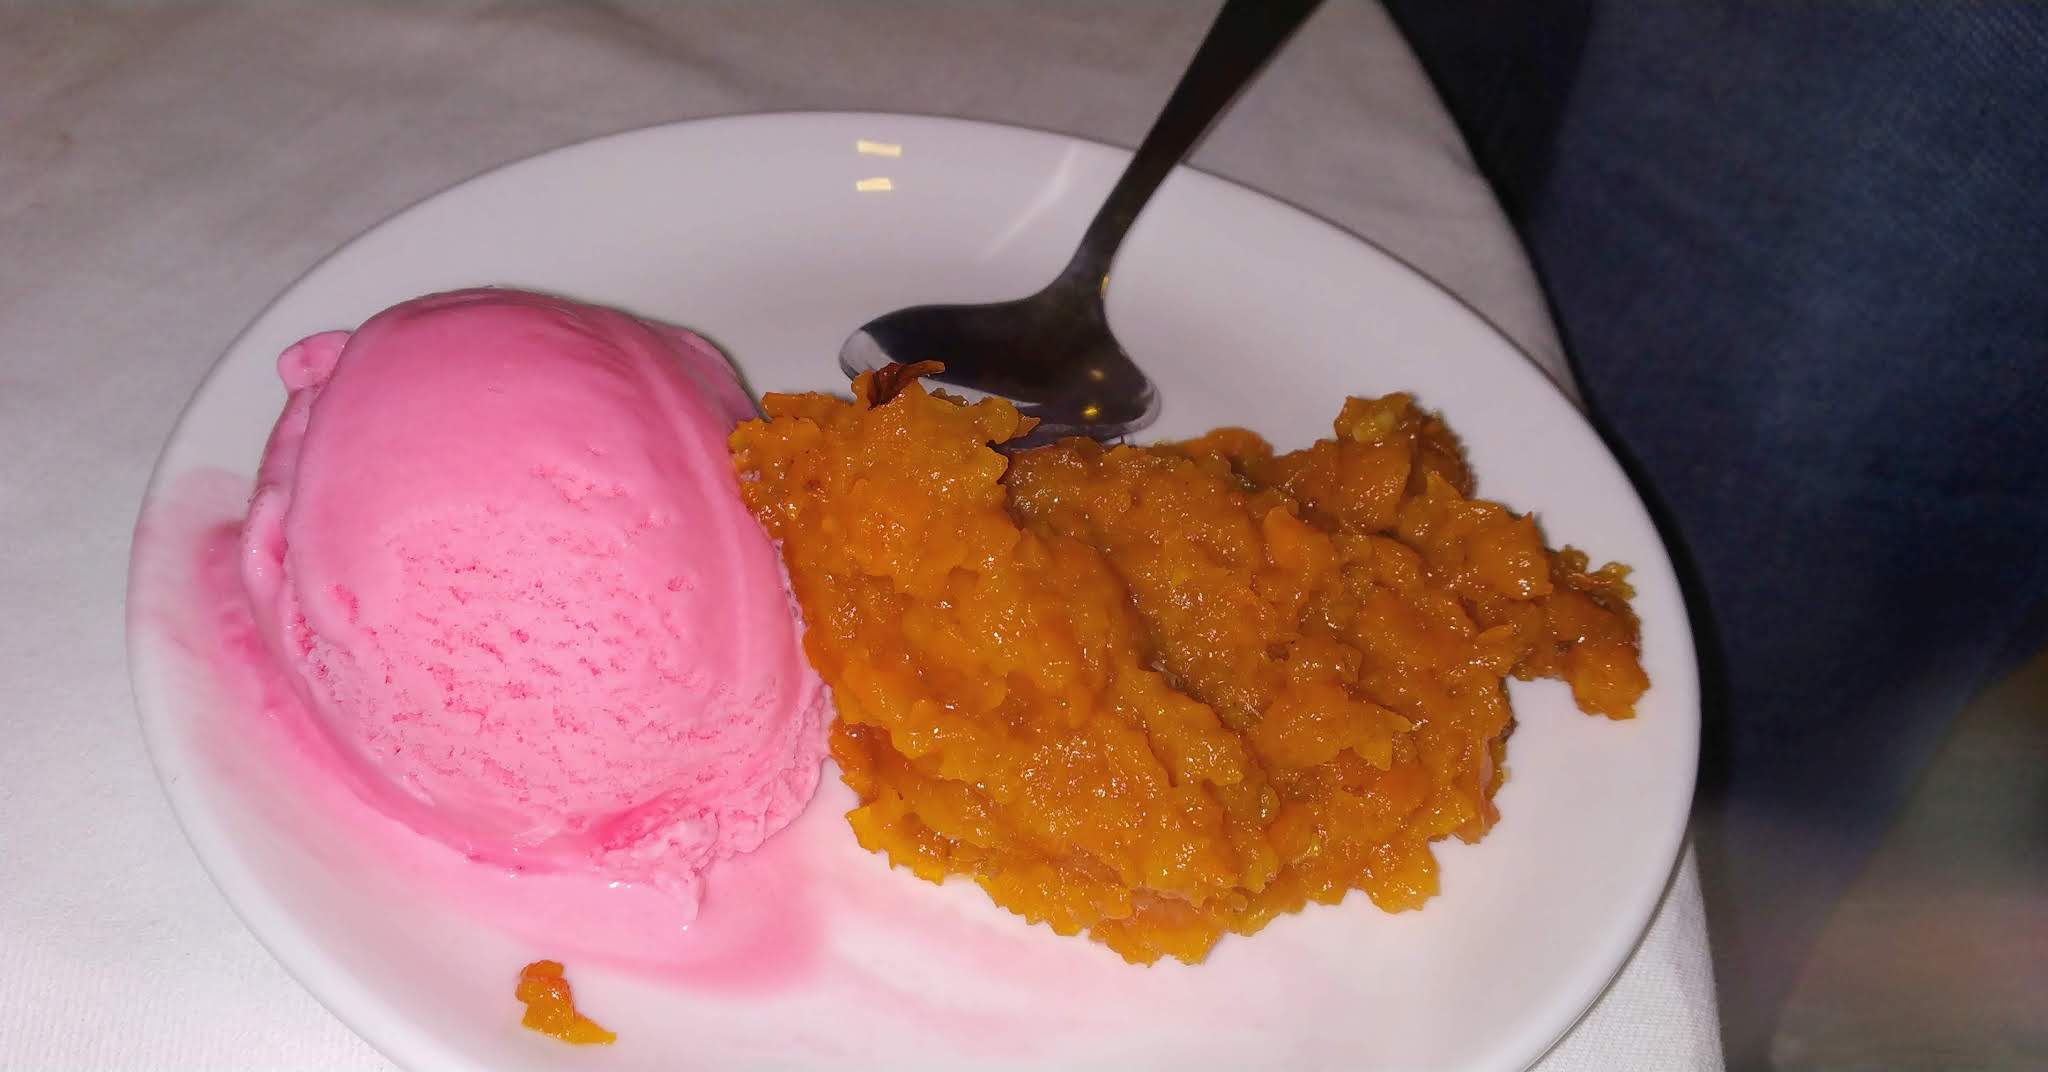 How to Eat Hot Gajar Halwa and Ice-Cream at a Single Time?